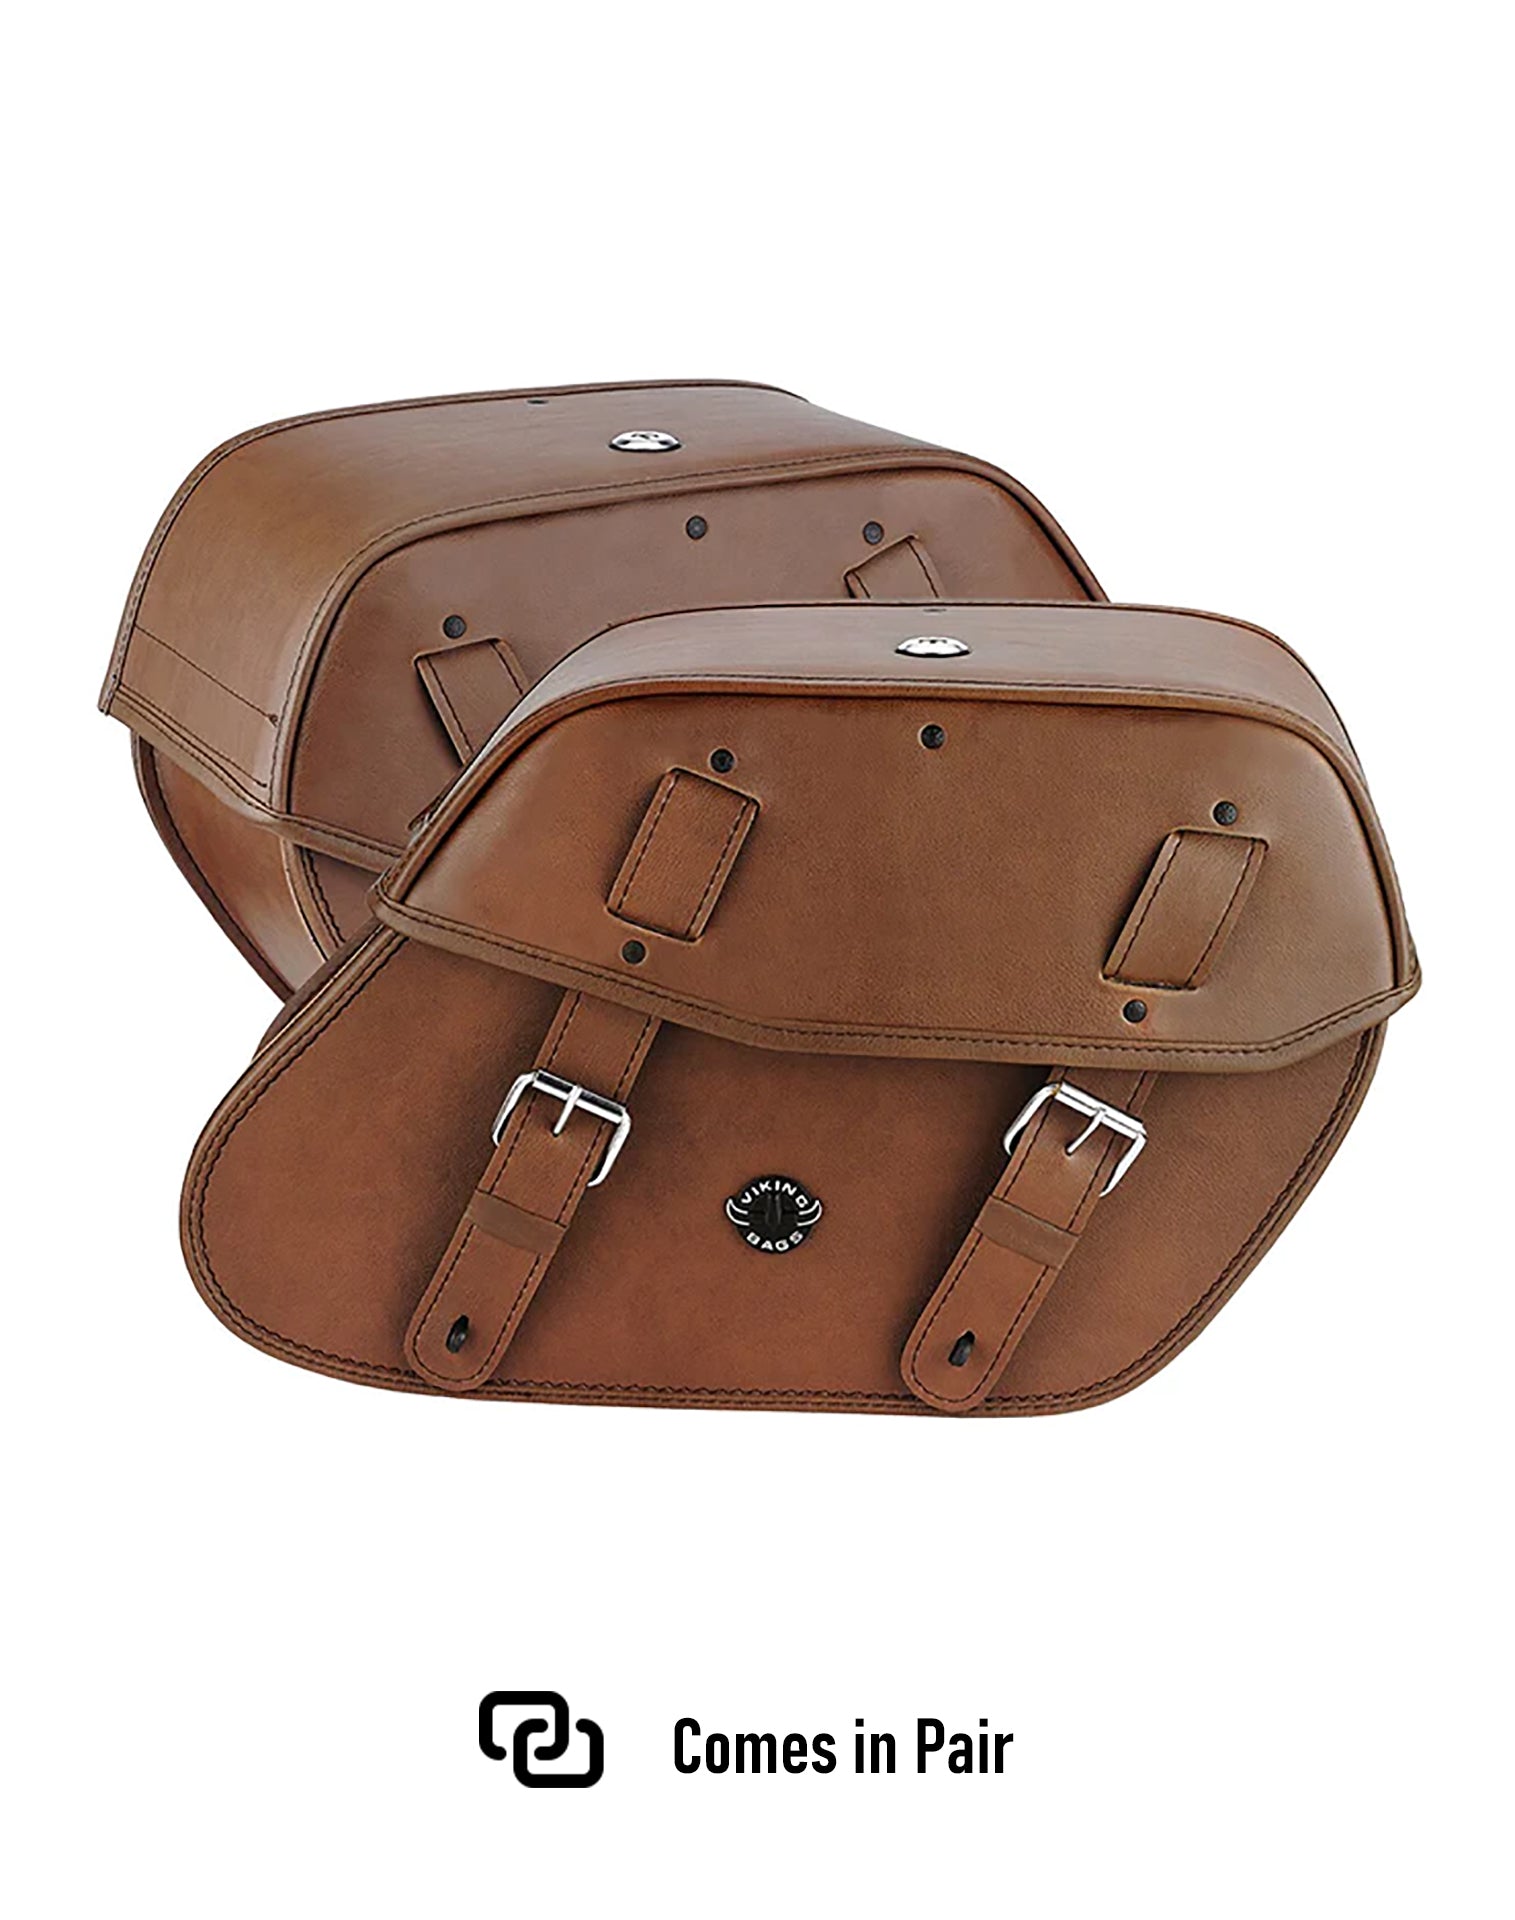 Viking Odin Brown Large Victory Vegas Leather Motorcycle Saddlebags Weather Resistant Bags Comes in Pair